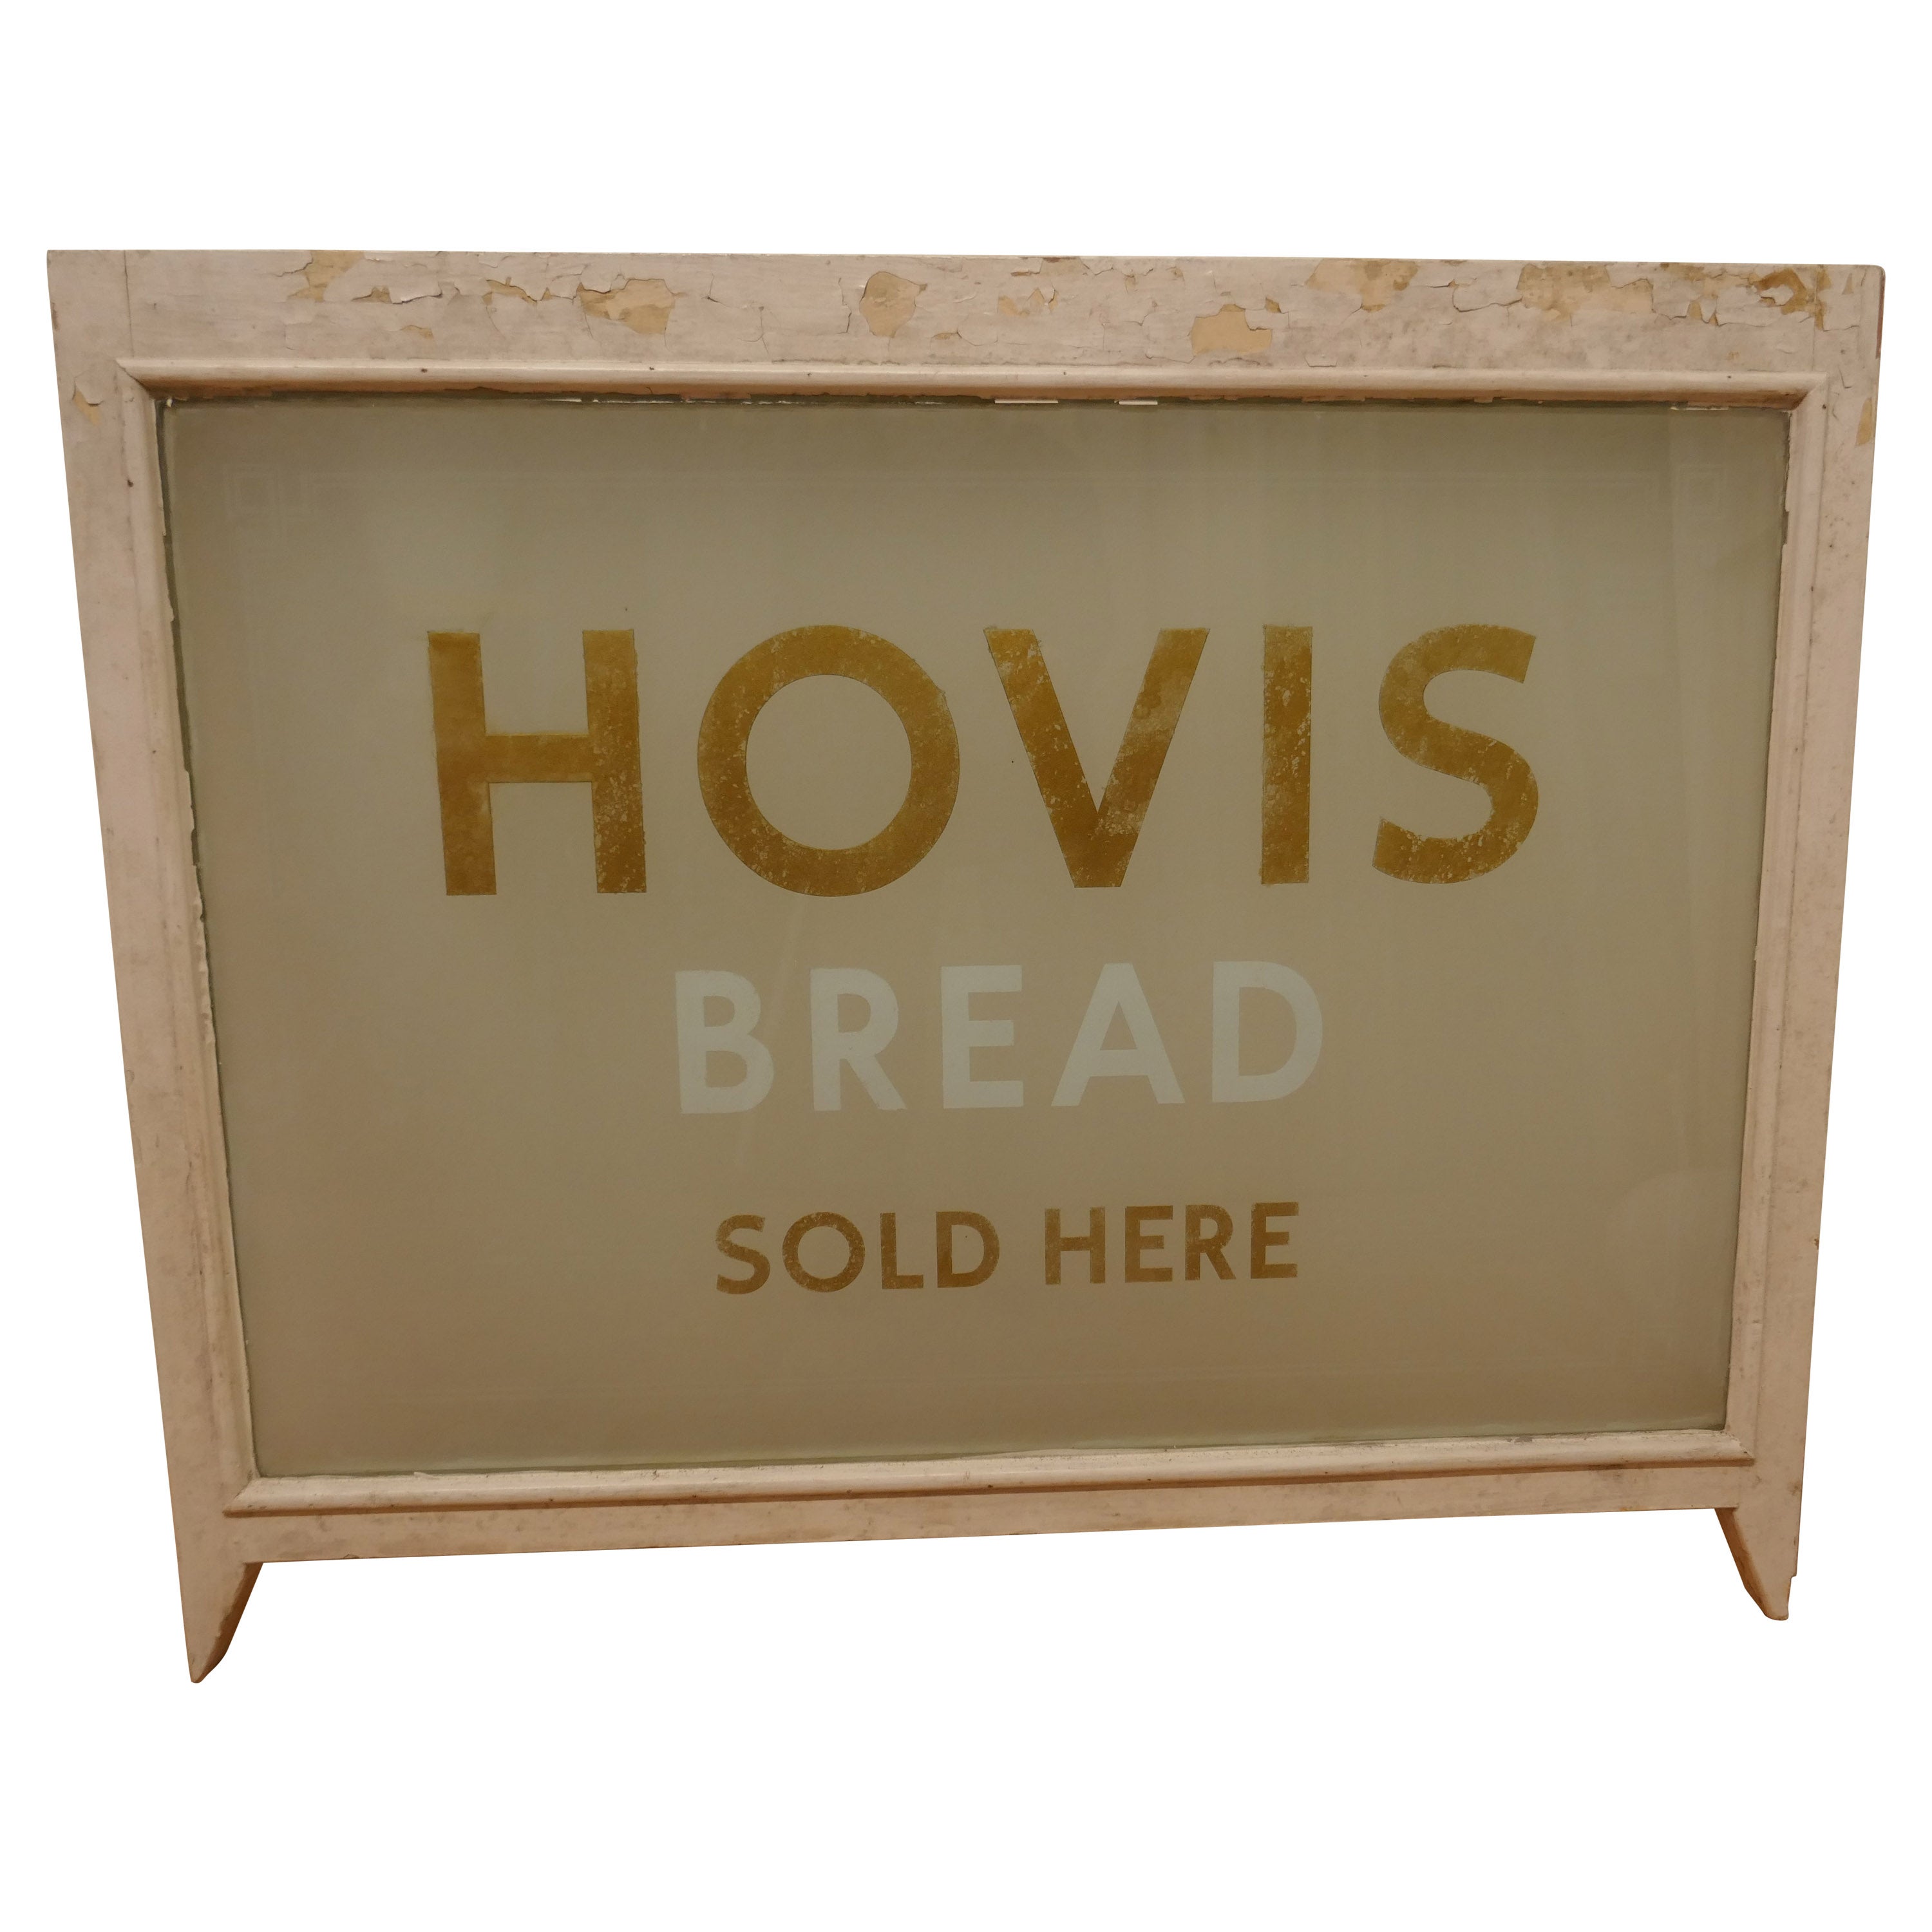 HOVIS, Etched Glass Bakery Advertising Window Sign For Sale